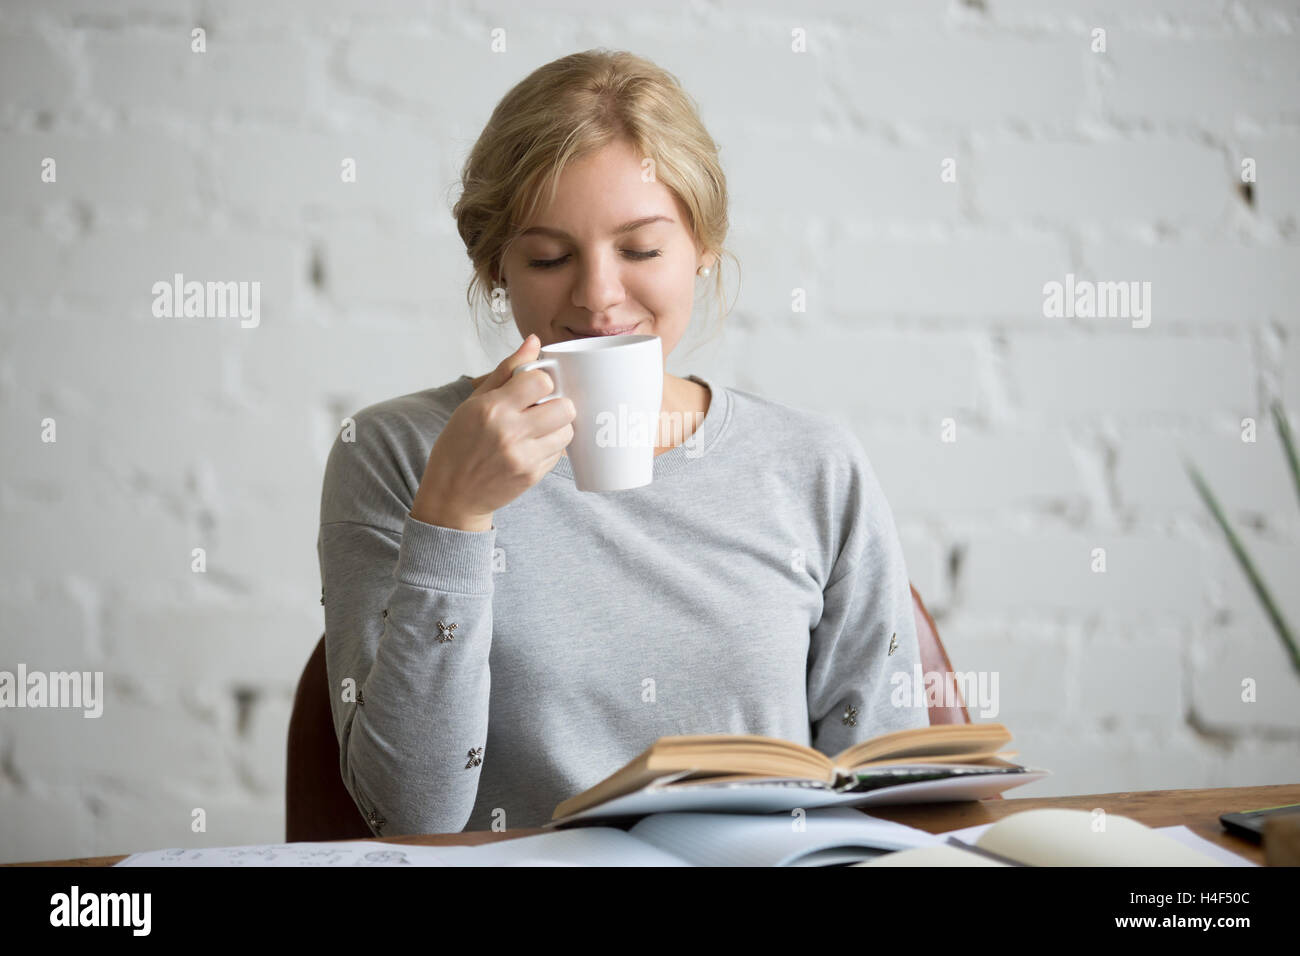 Portrait of a student girl inhaling aroma of her drink Stock Photo